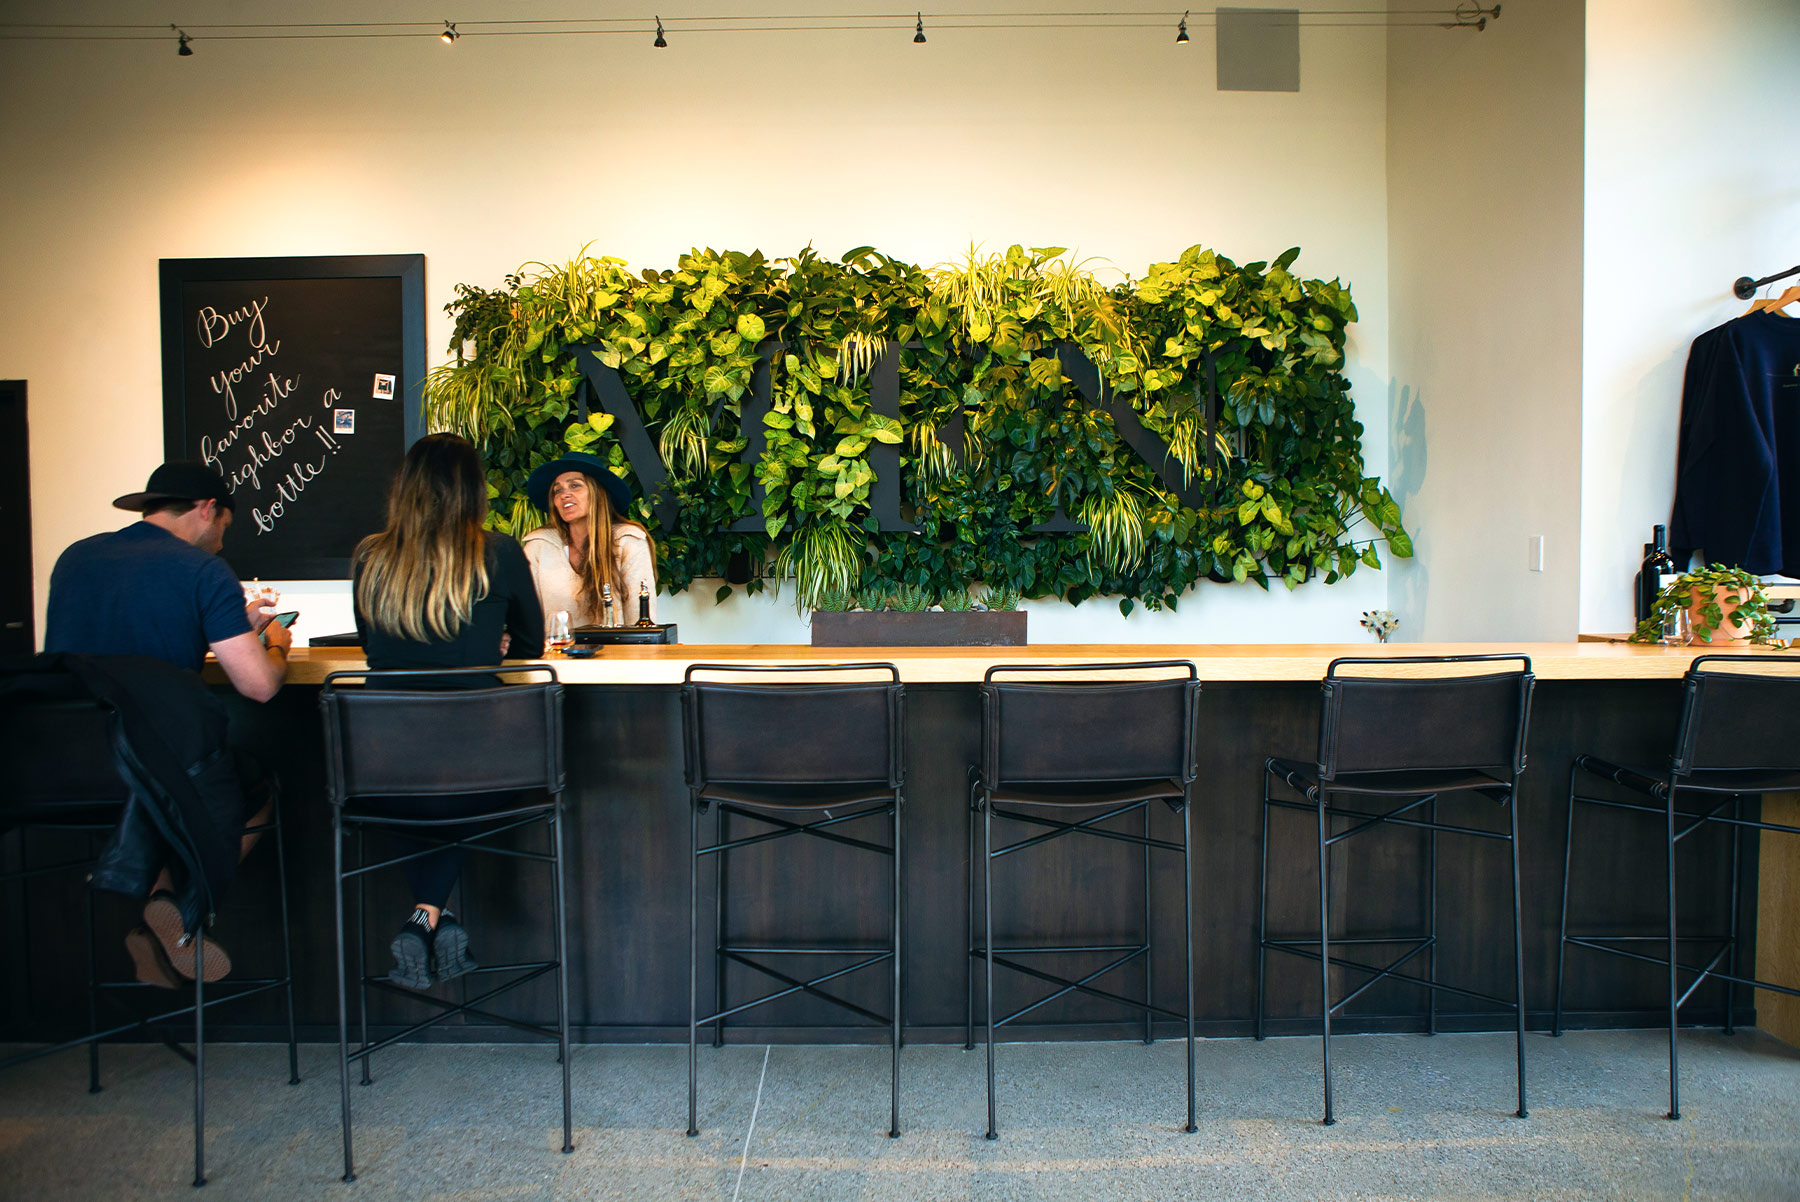 MFN Tasting Room, featuring a green wall